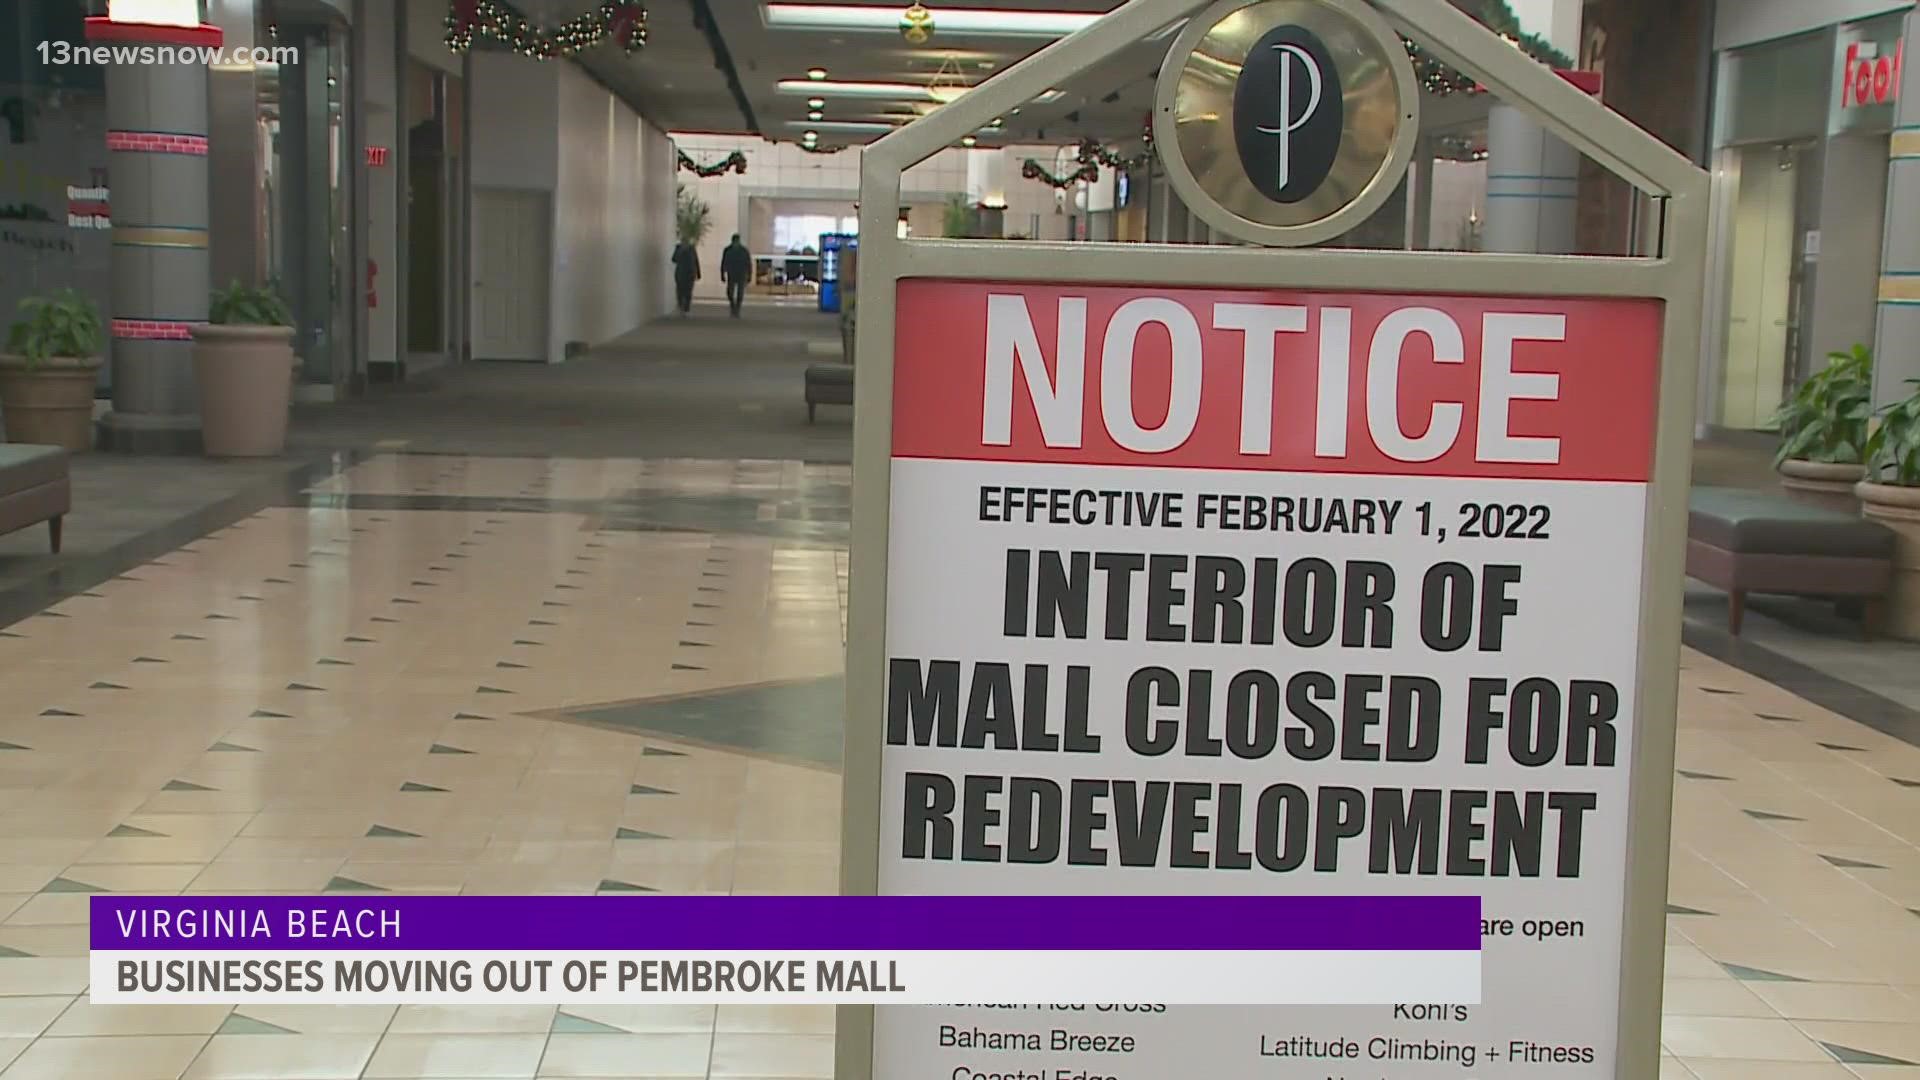 The mall will be closed for redevelopment starting in February.